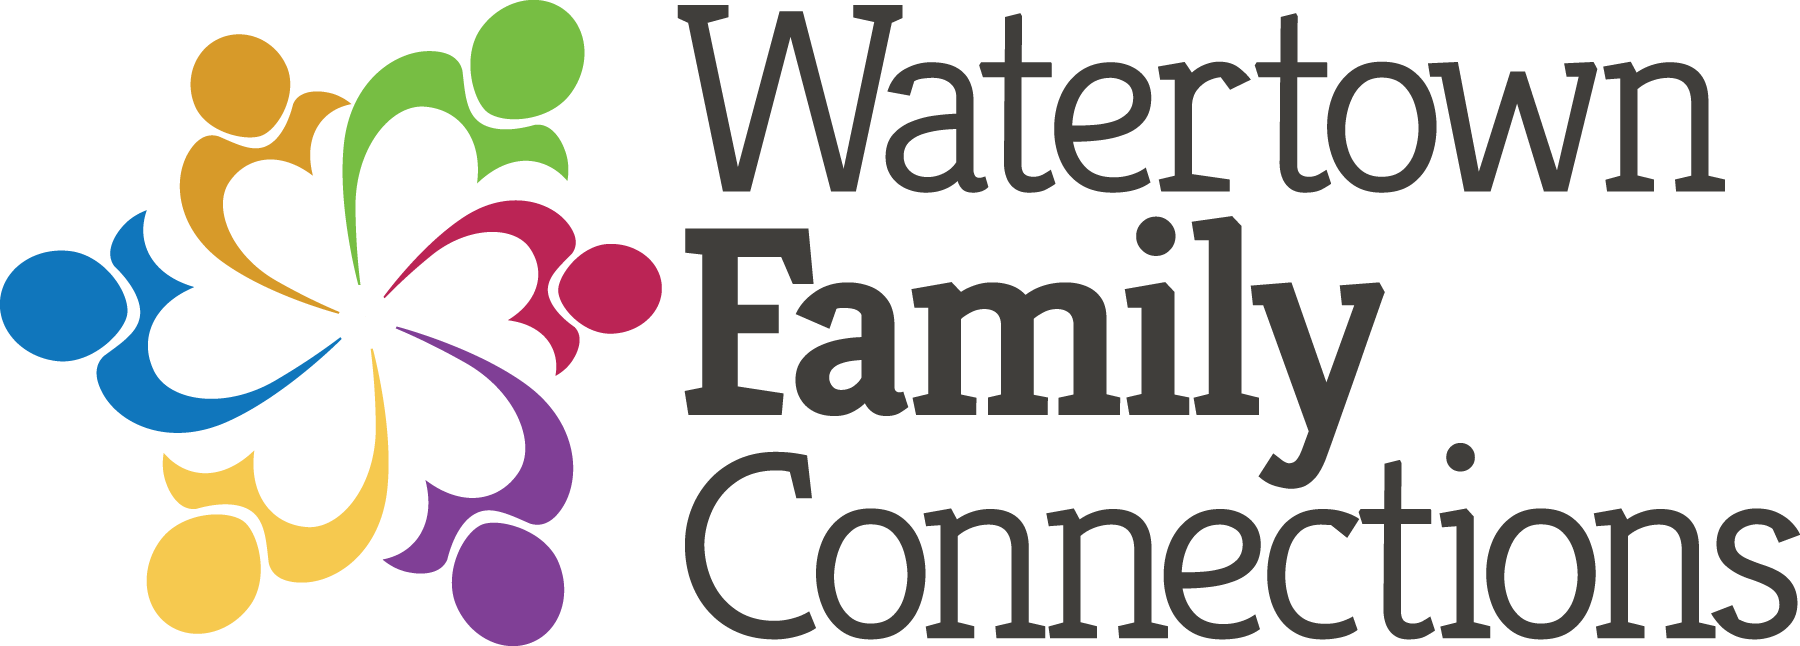 Events for March 2, 2023 Watertown Family Connections